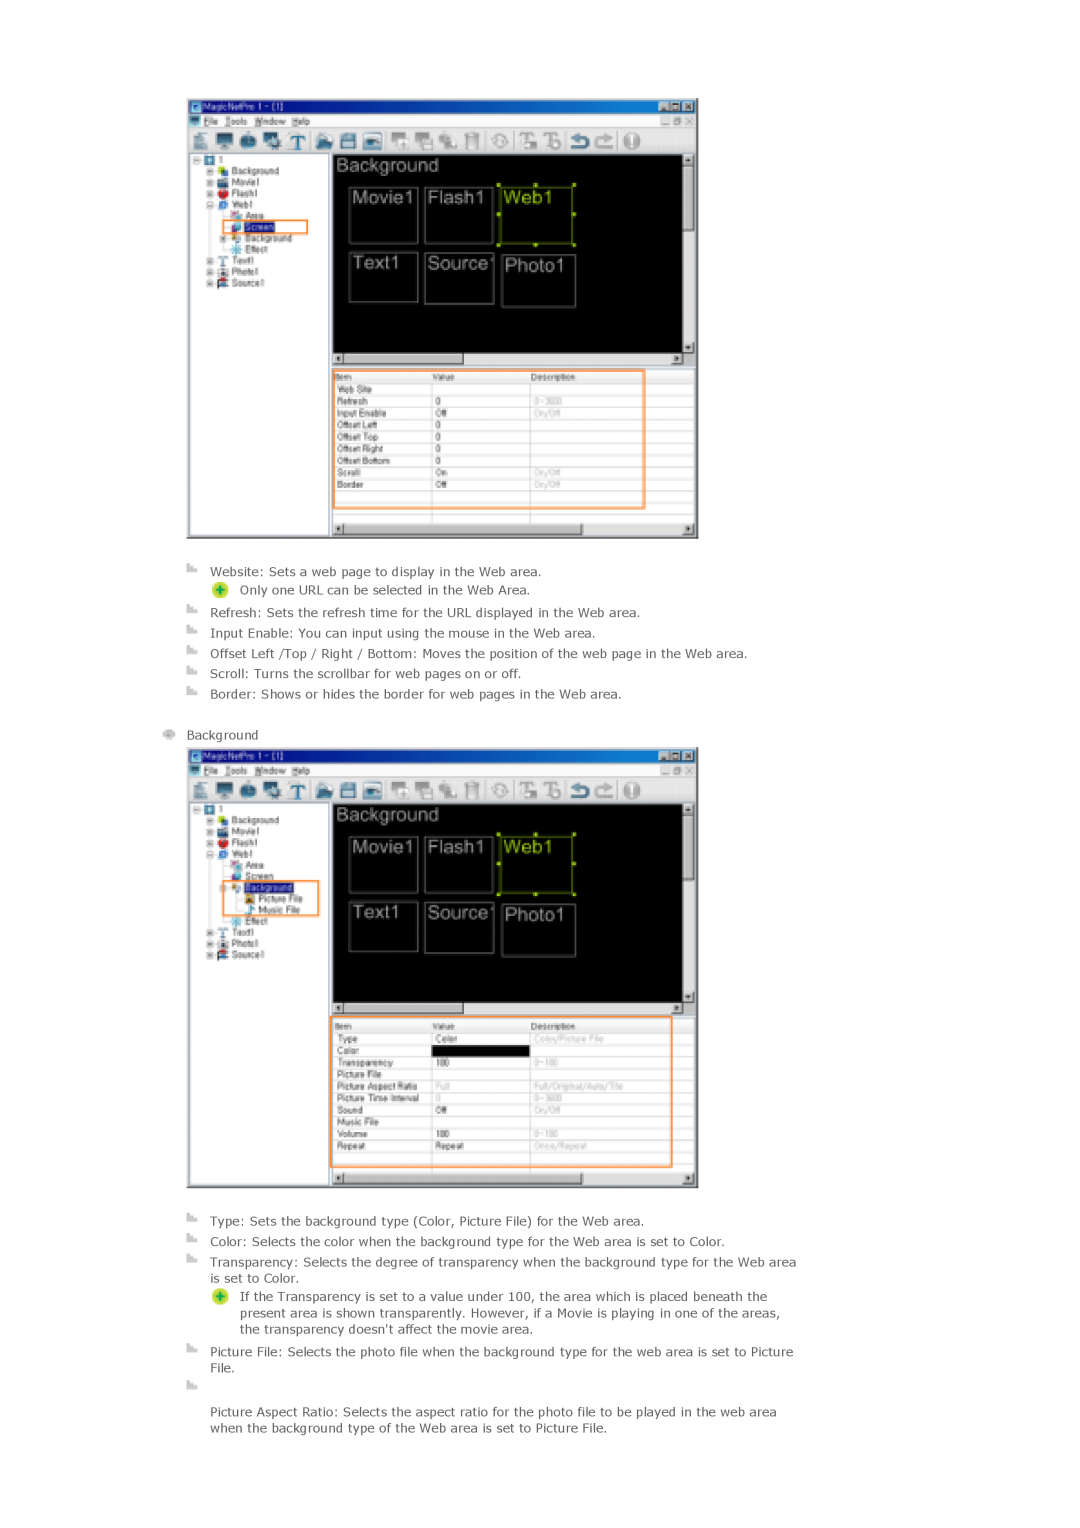 Samsung 820DXN, 700DXn Website Sets a web page to display in the Web area, Only one URL can be selected in the Web Area 